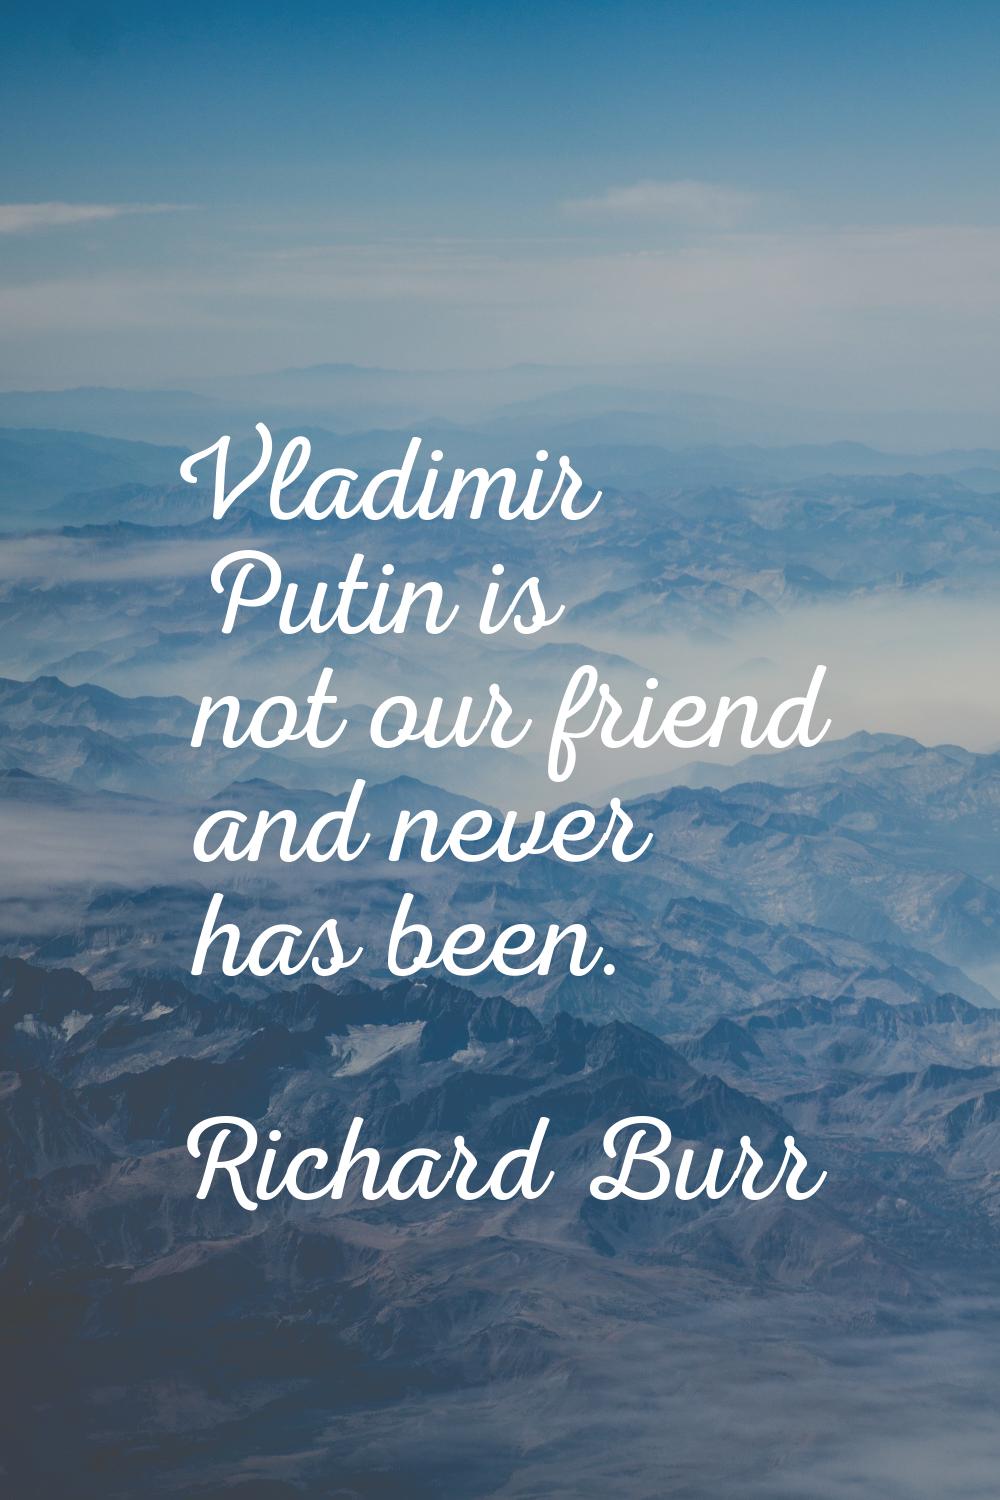 Vladimir Putin is not our friend and never has been.